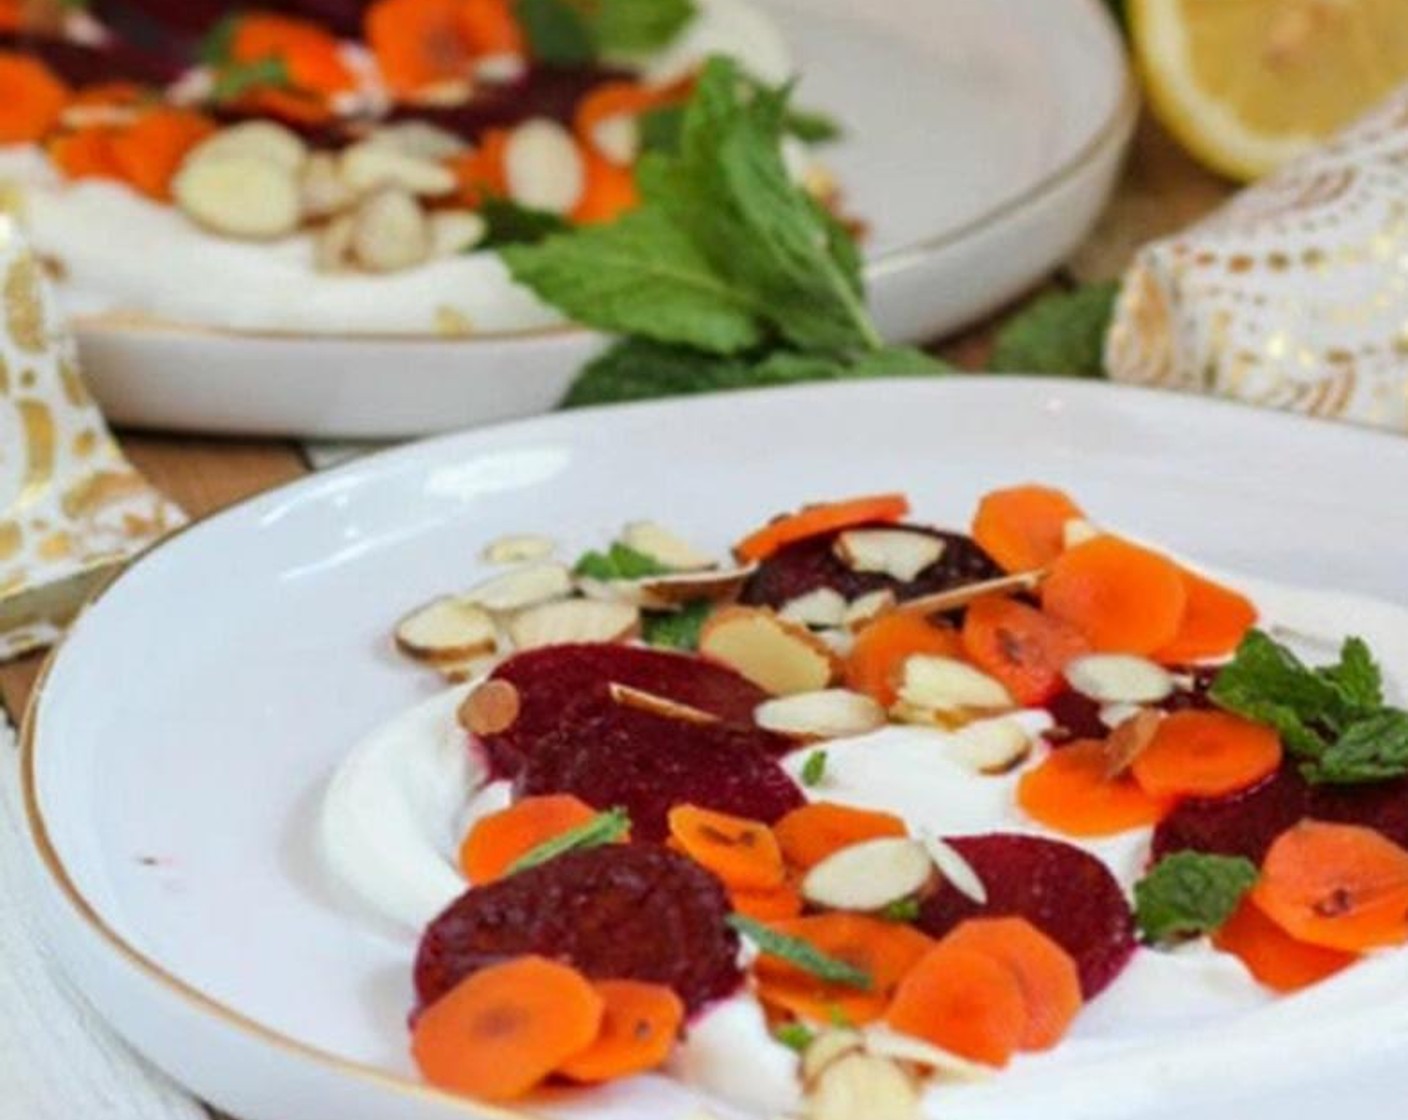 Roasted Beet Salad with Pickled Carrots